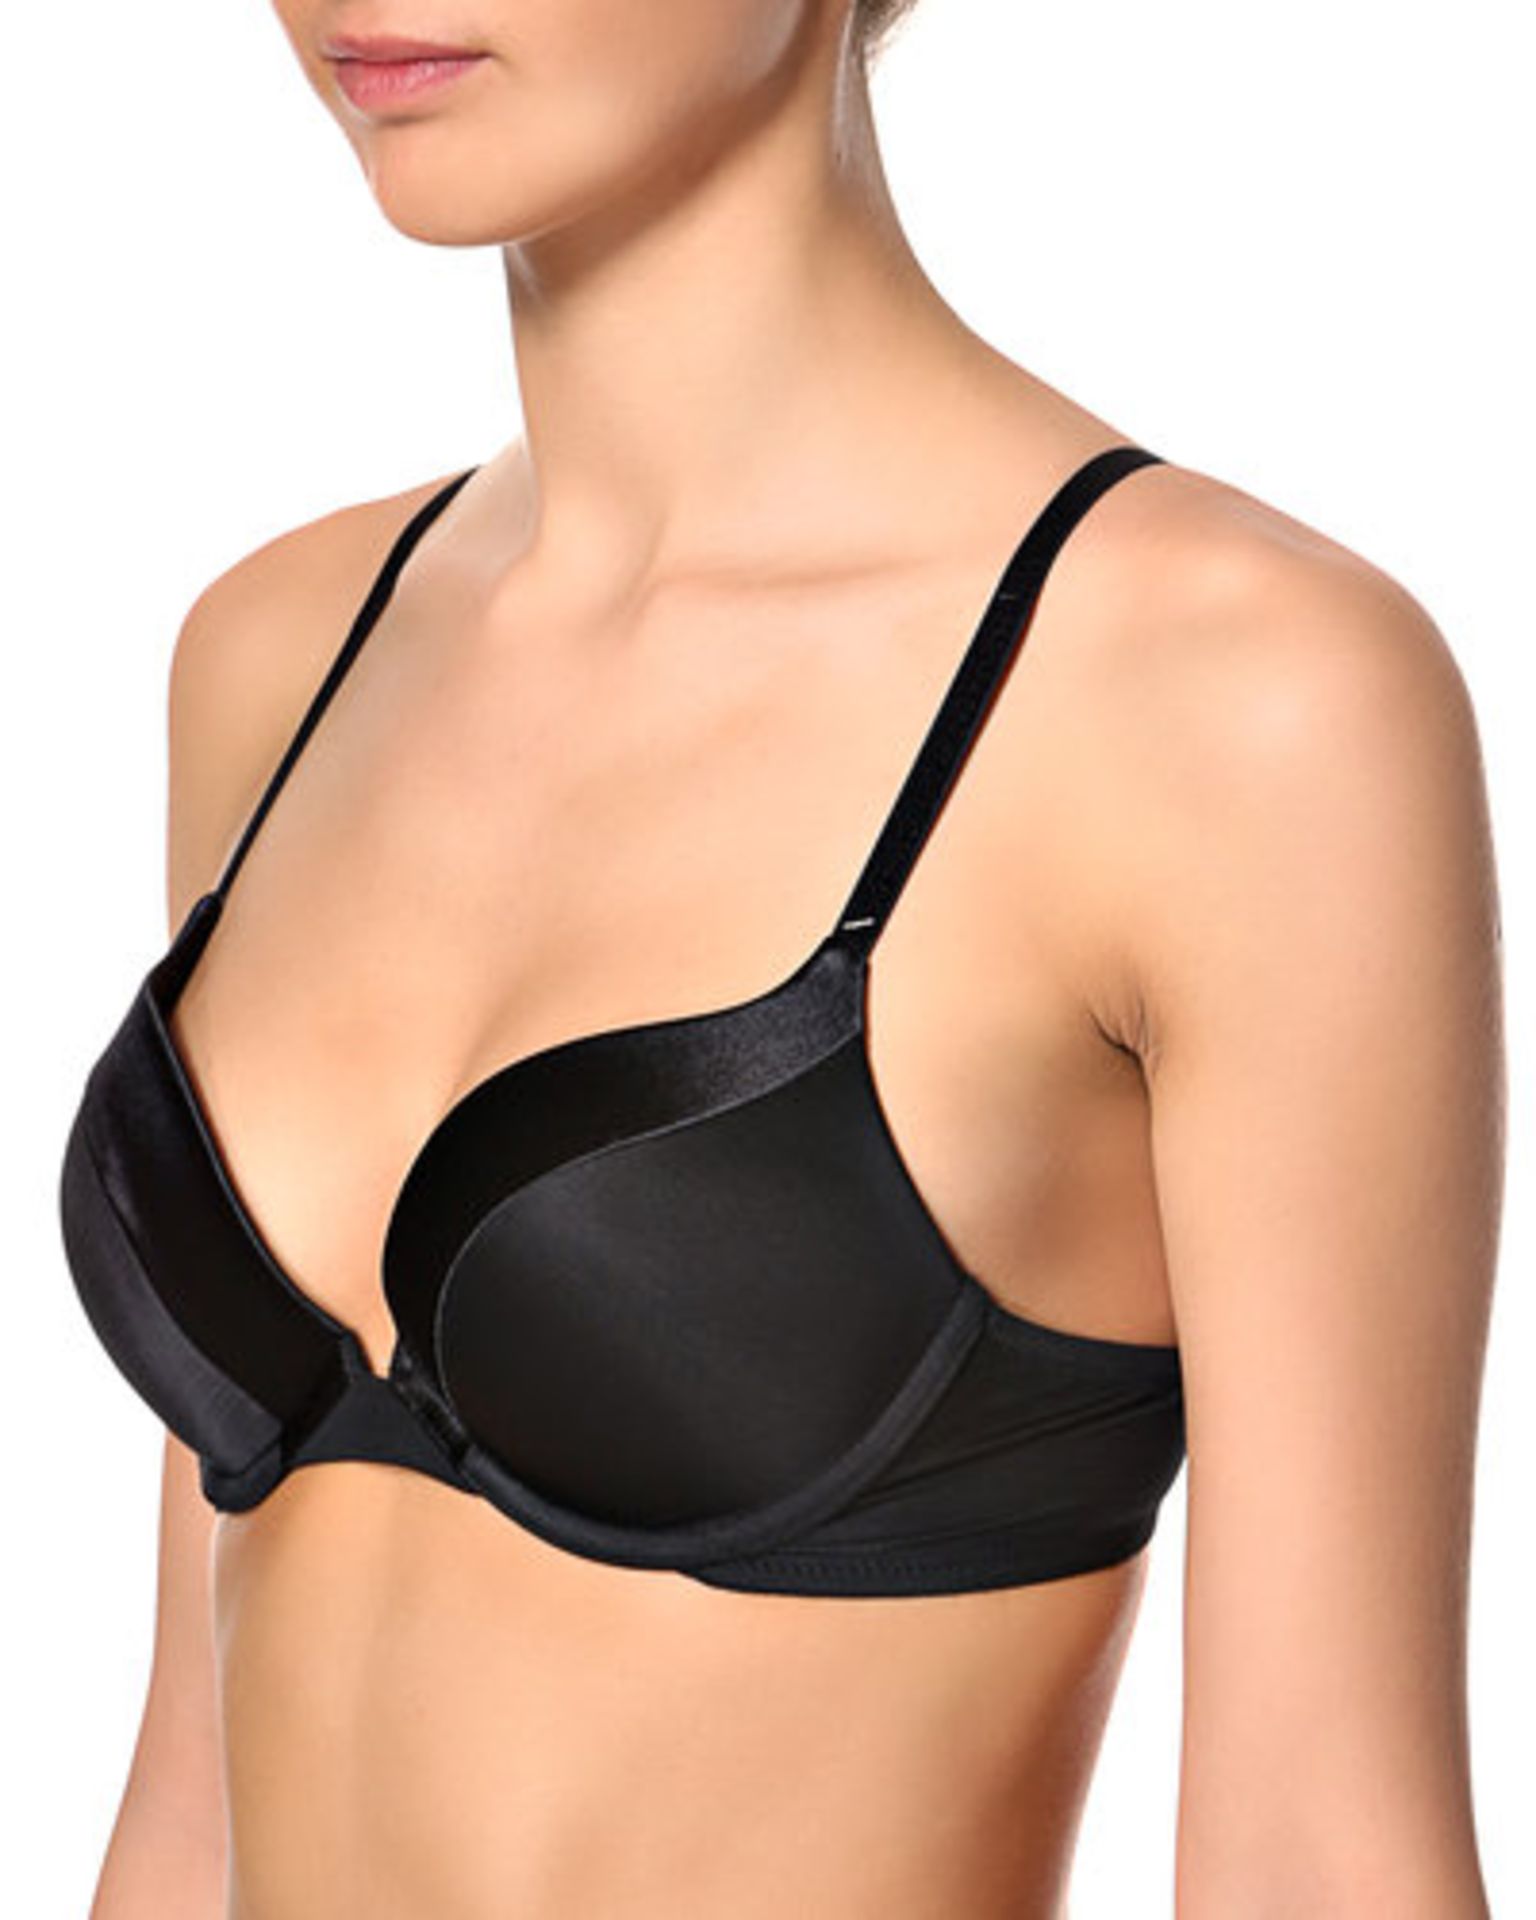 V  Grade A Maidenform Sweet Nothings 34A Black push up bra X  2  Bid price to be multiplied by Two